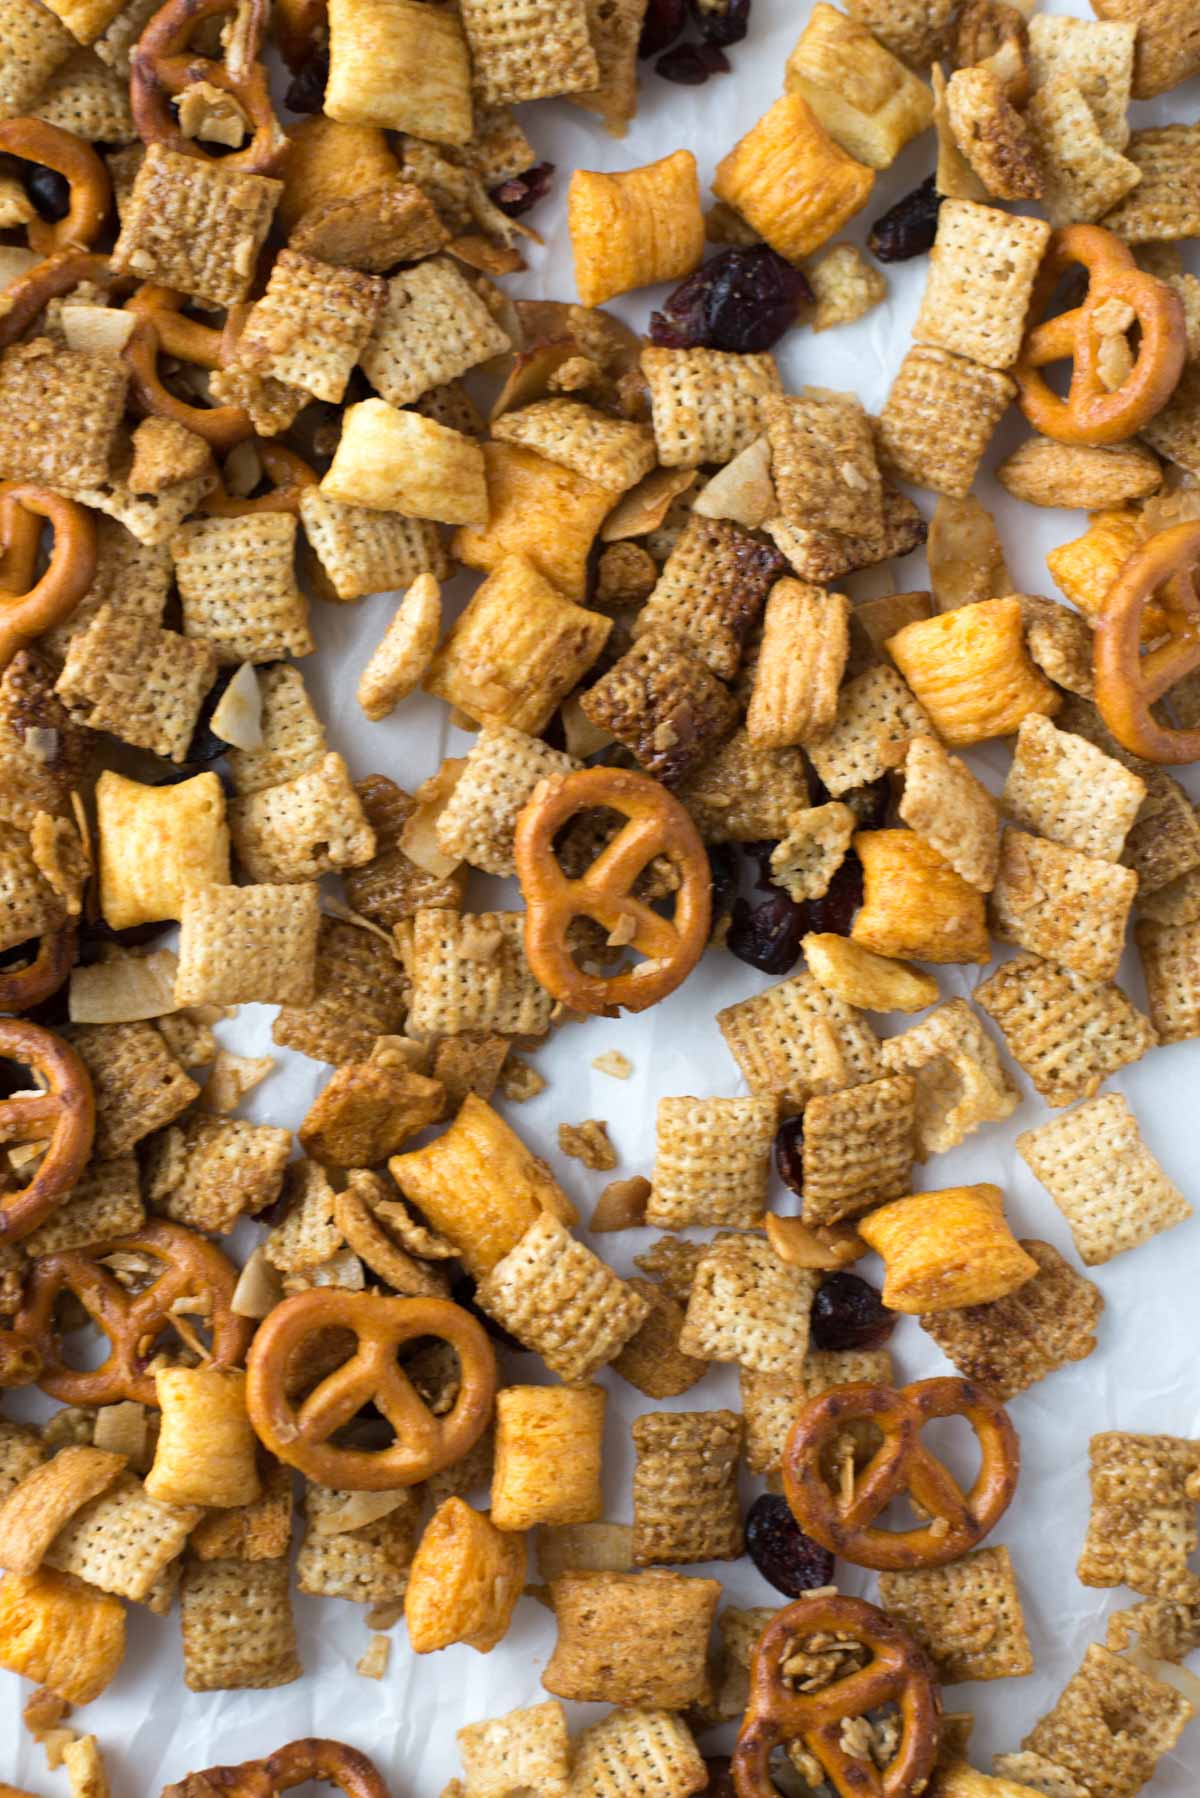 A quick and healthy alternative to traditional sweet chex mix. This maple version has big flavor with over half as much sugar.